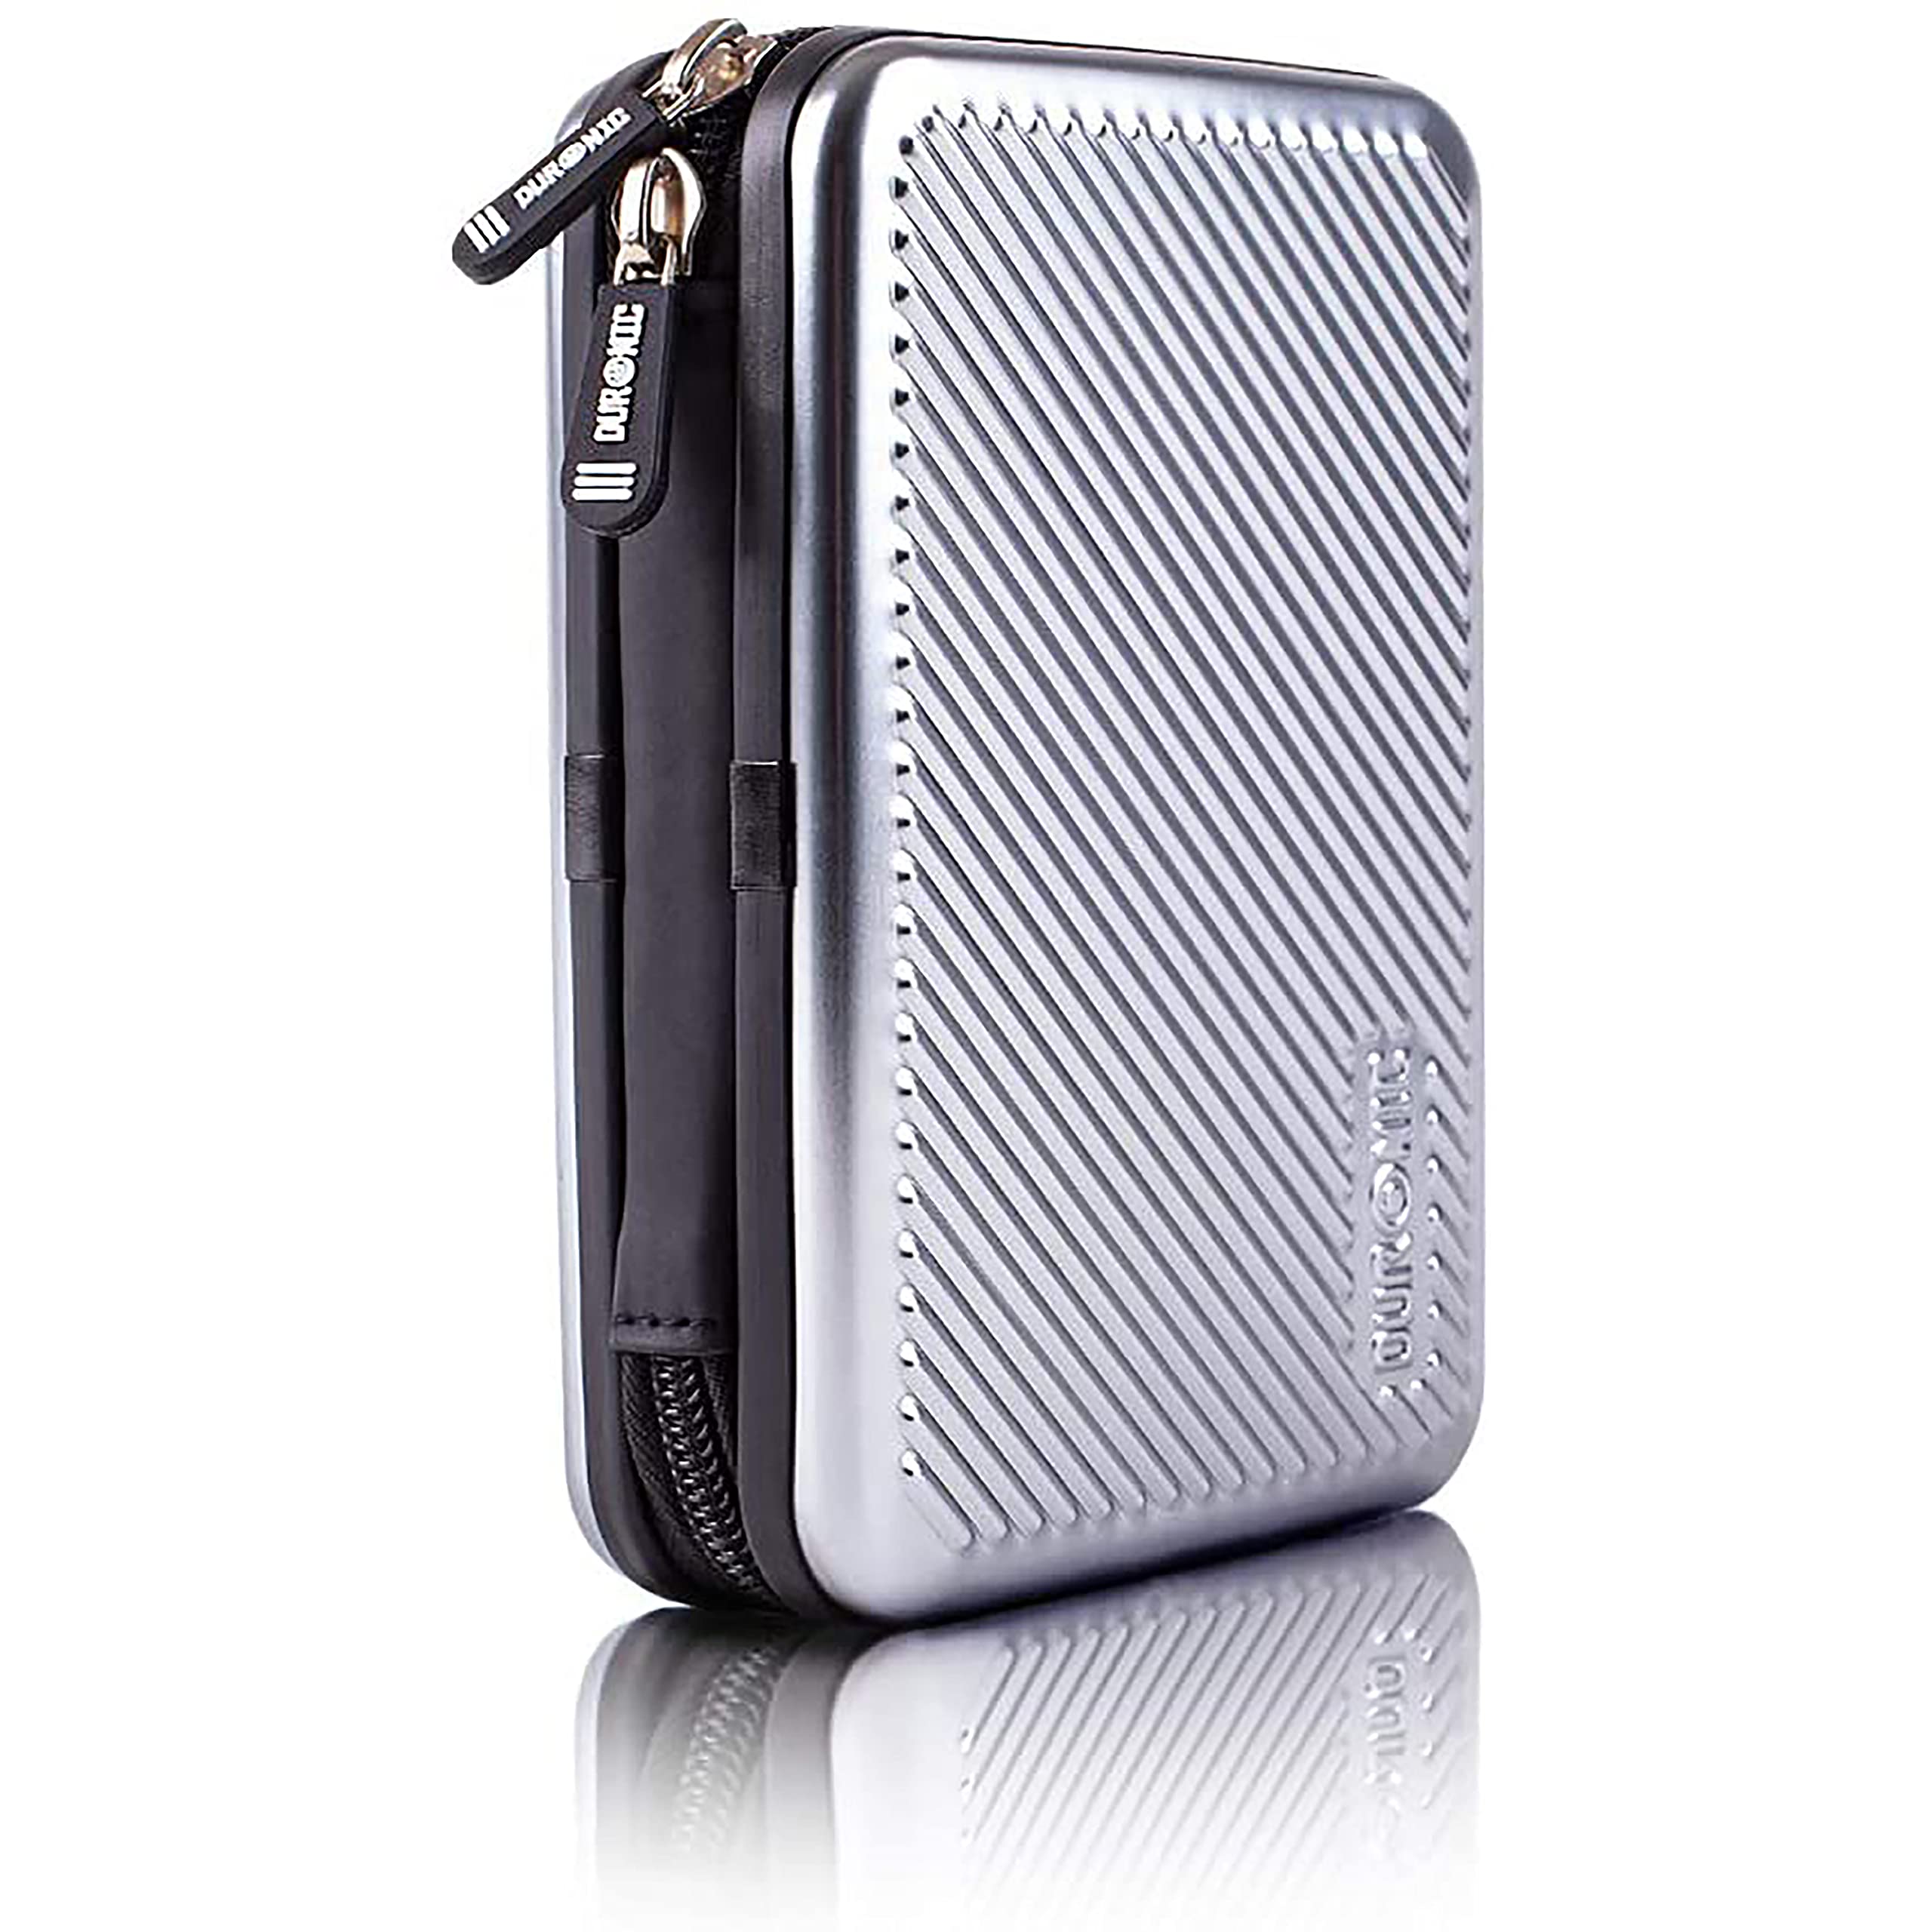 Duronic Hard Drive Case HDC3 /SR, SILVER, Portable ALUMINIUM Storage Pouch for External Hardrive & Cables, Lightweight & Protective, Suitable for Western, Toshiba, Buffalo, Hitachi, Seagate, Samsung